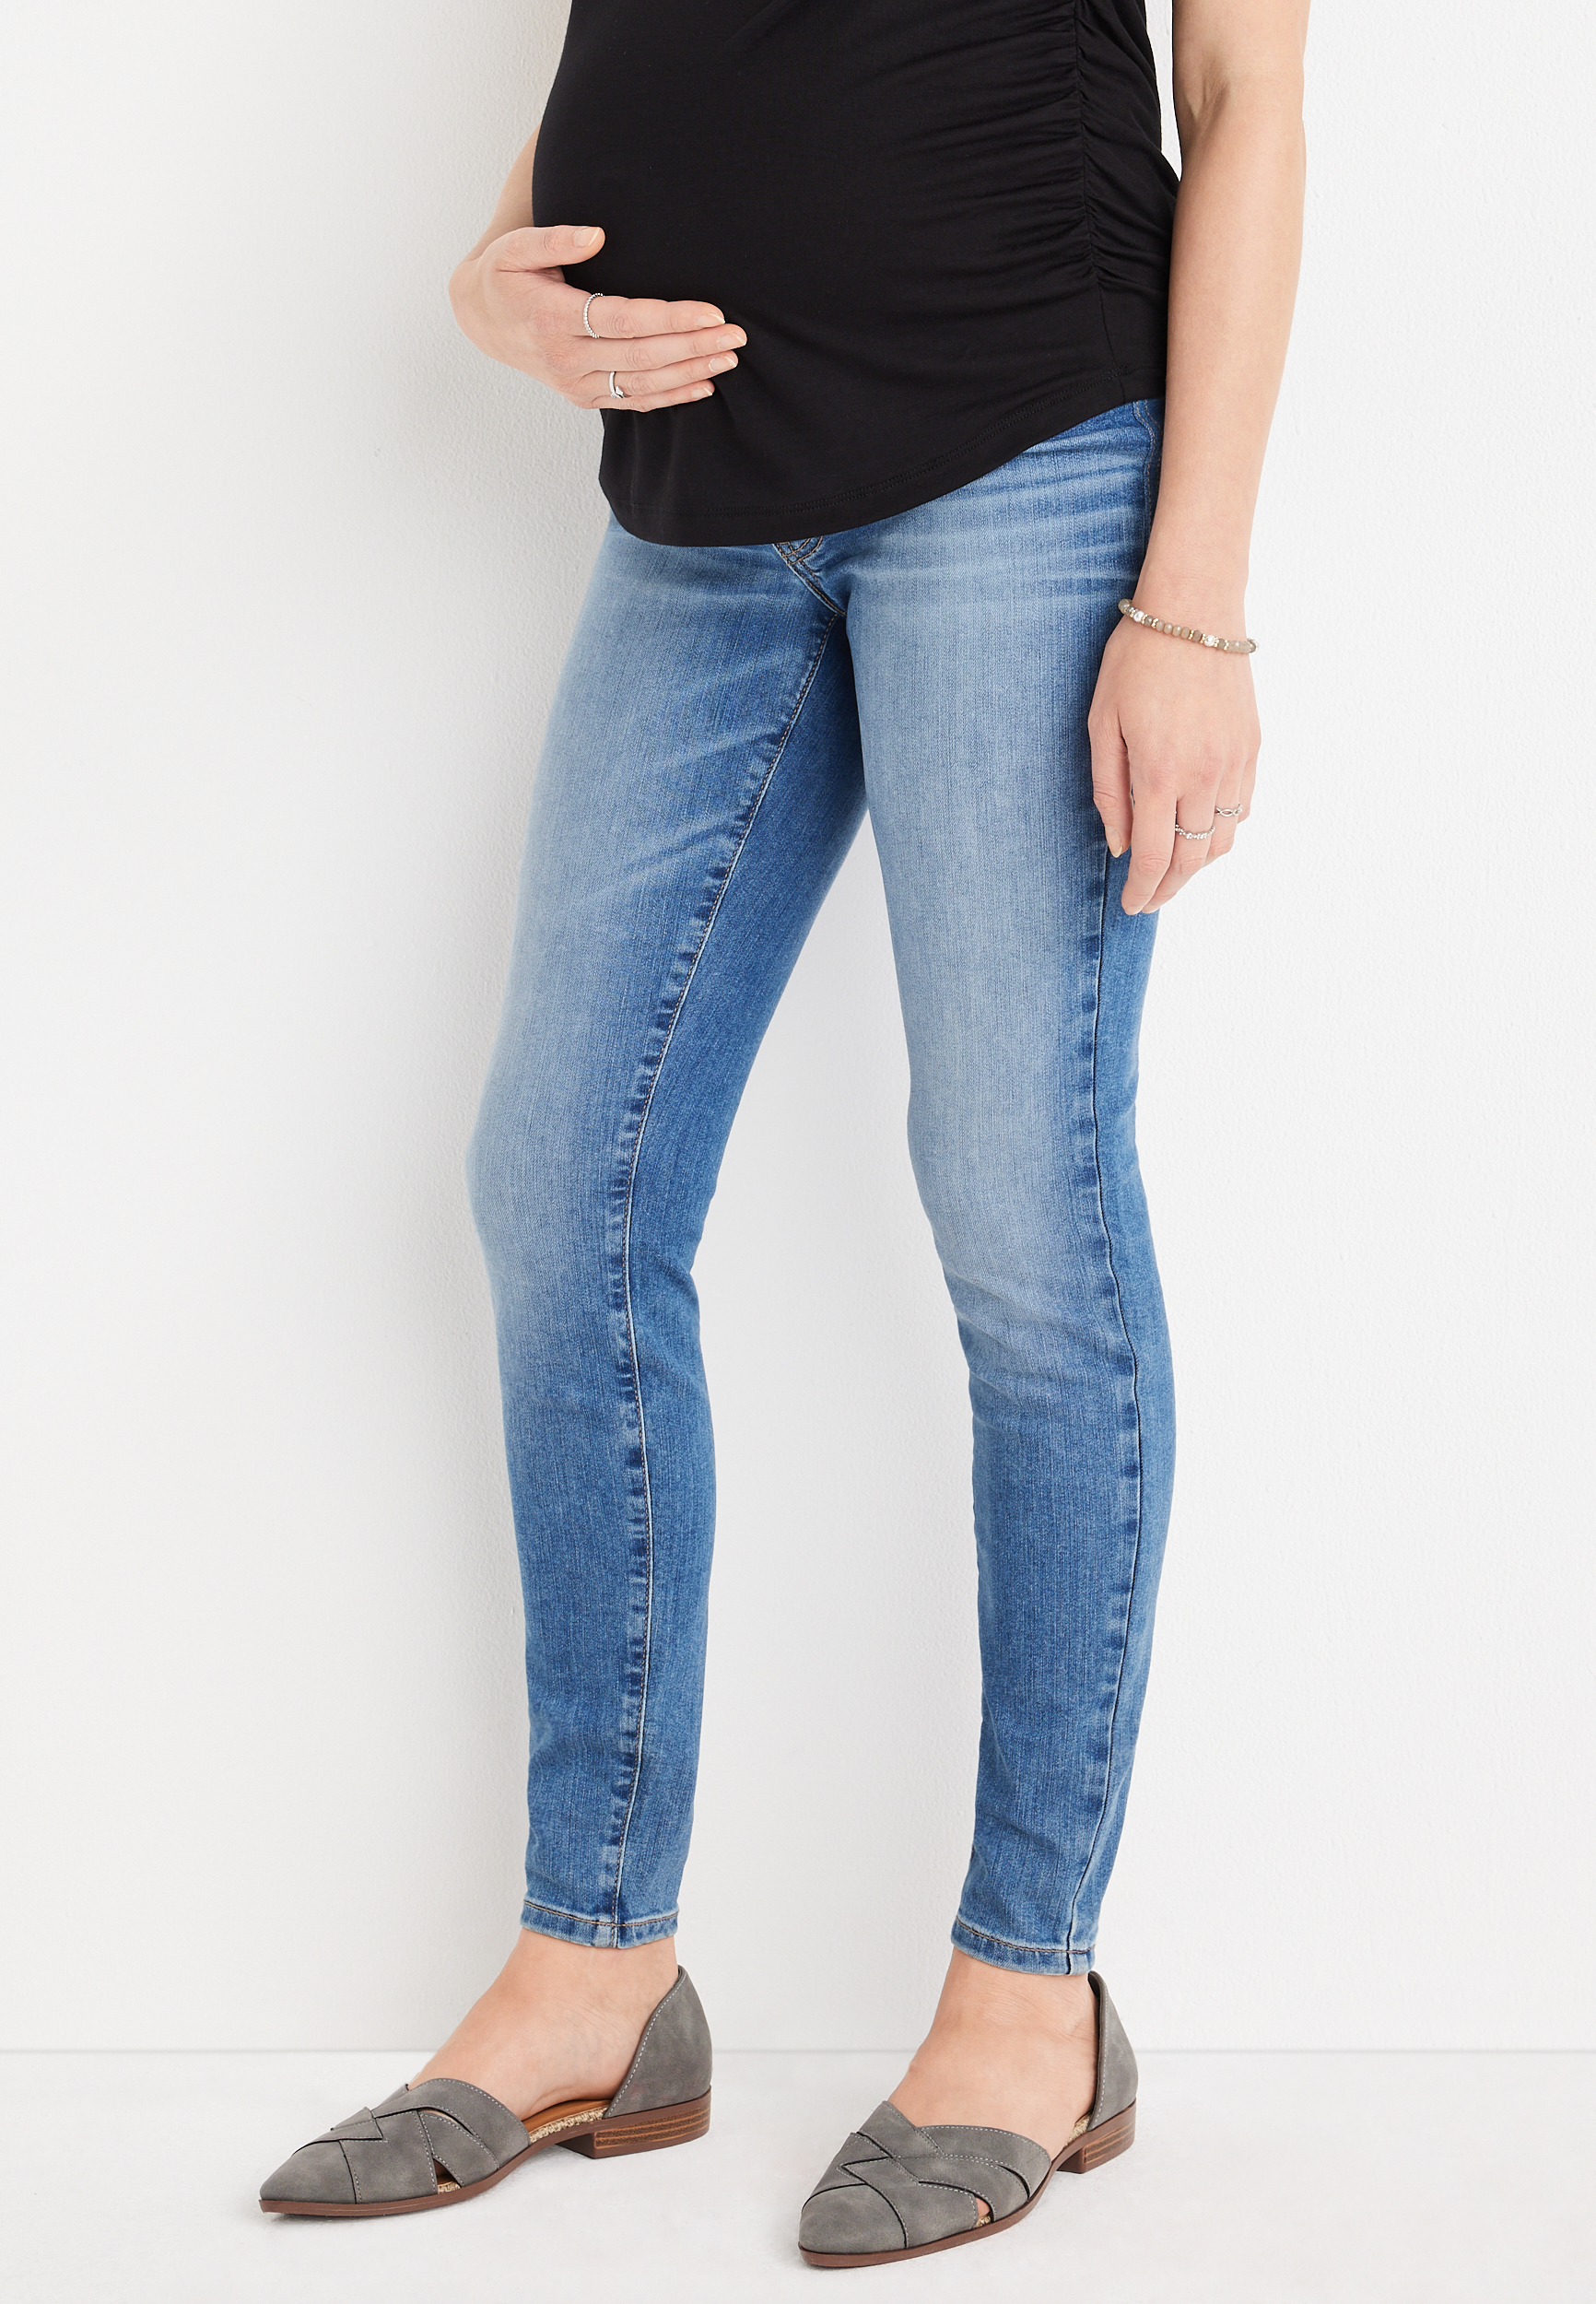 m jeans by maurices™ Capri Side Panel Maternity Jean